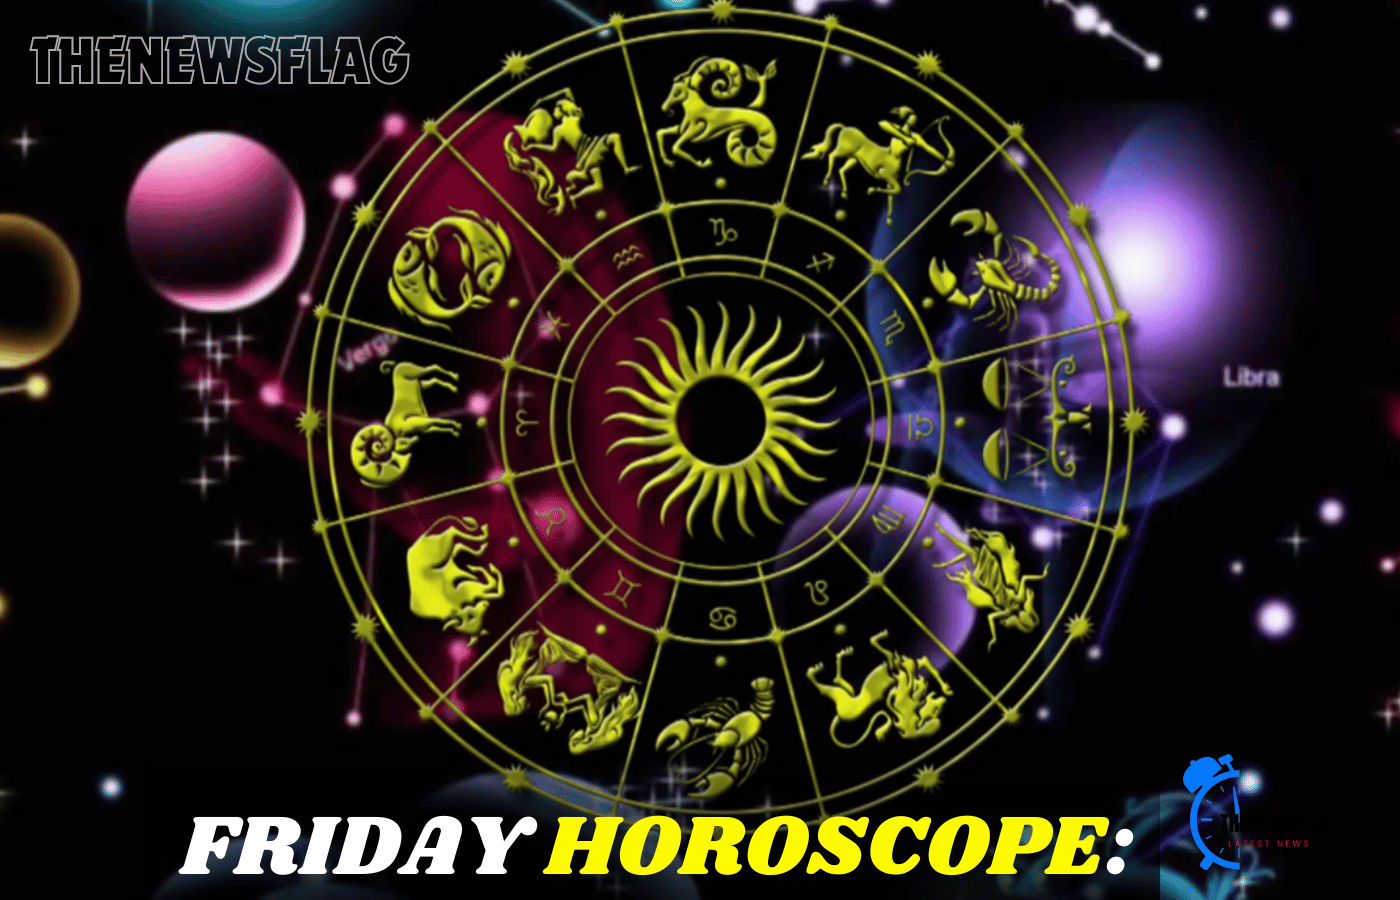 Friday Horoscope: Check out today's horoscope. Those born under this sign will win the lottery, and two signs will have their jobs fouled up.